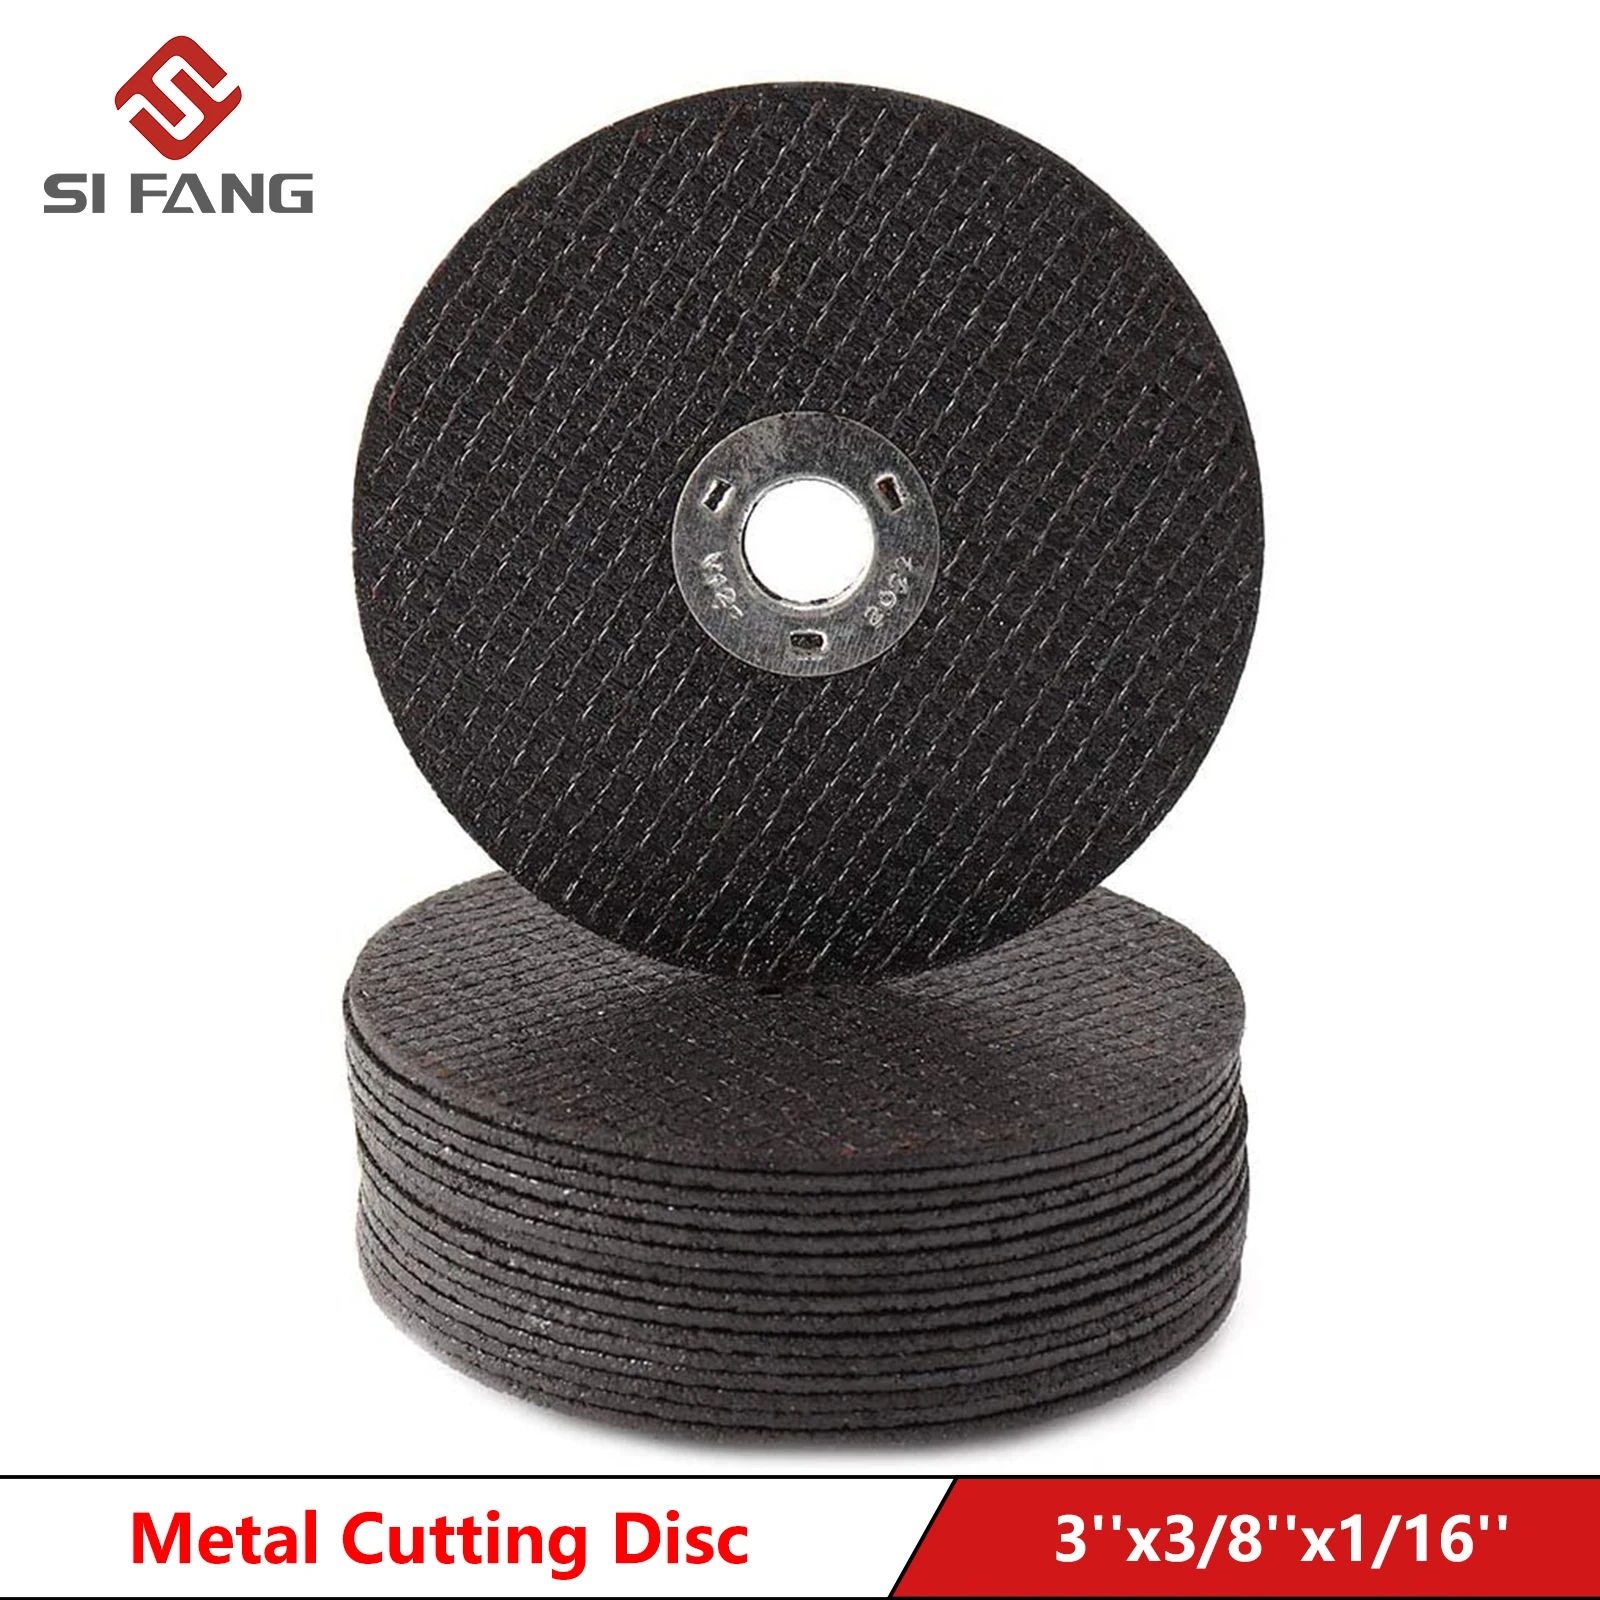 3'' 75mm Mini Cutting Disc Circular Resin Grinding Wheel For Angle Grinder Polishing Cutting Disc Electic Cutting Sheet 10pcs 107mm cutting disc angle grinder grinding polishing grinding wheel resin cutting stainless steel angle grinder accessories